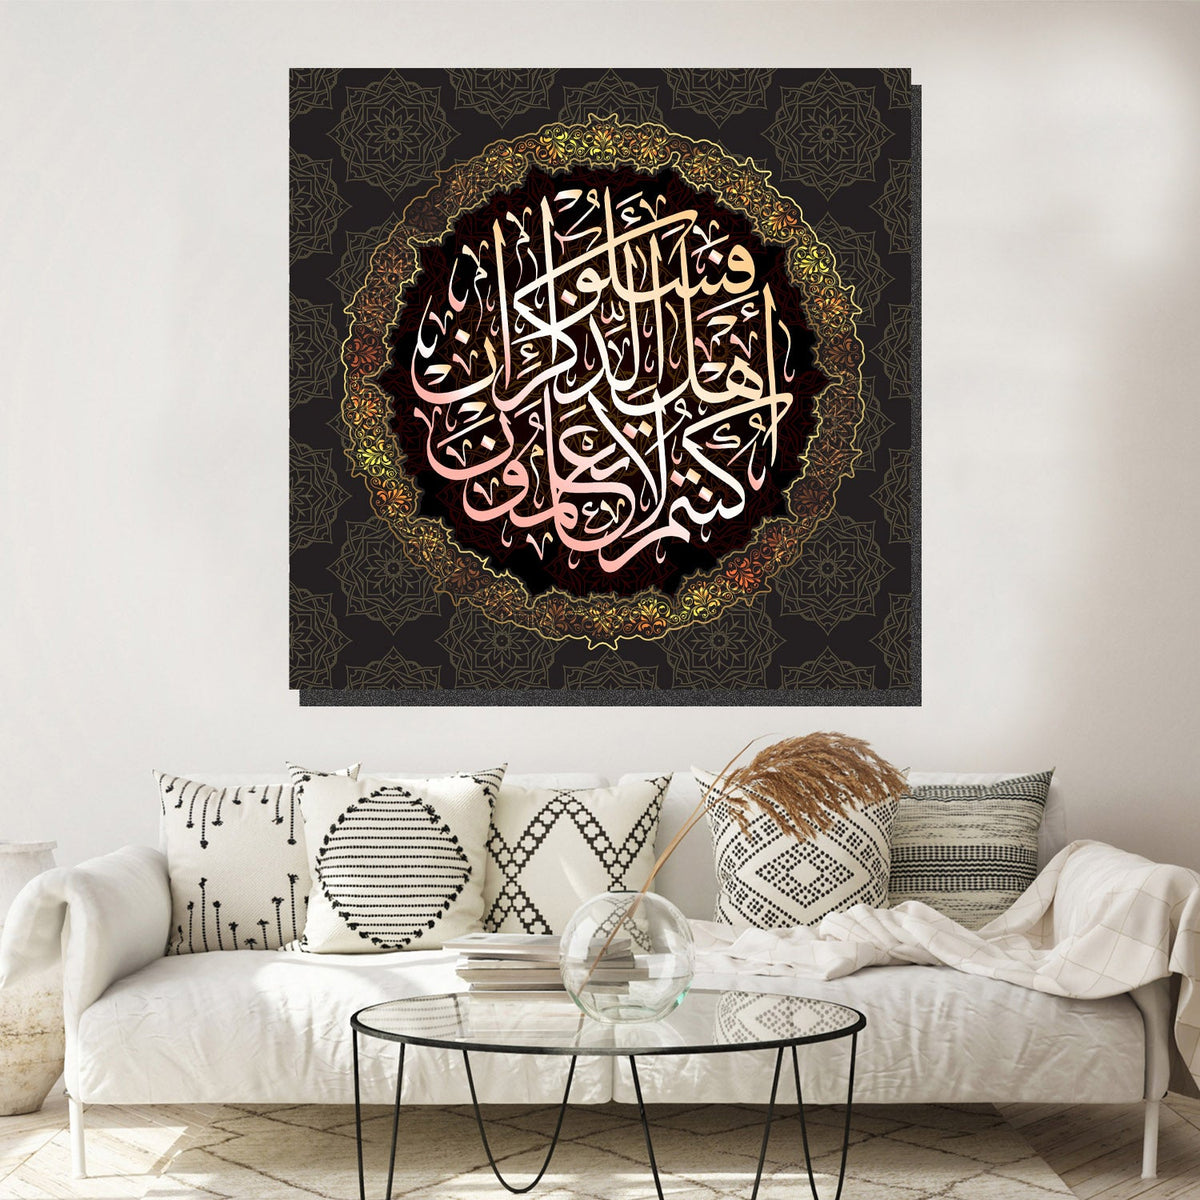 https://cdn.shopify.com/s/files/1/0387/9986/8044/products/IslamicArtLimitedEdition12CanvasArtprintStretched-1.jpg